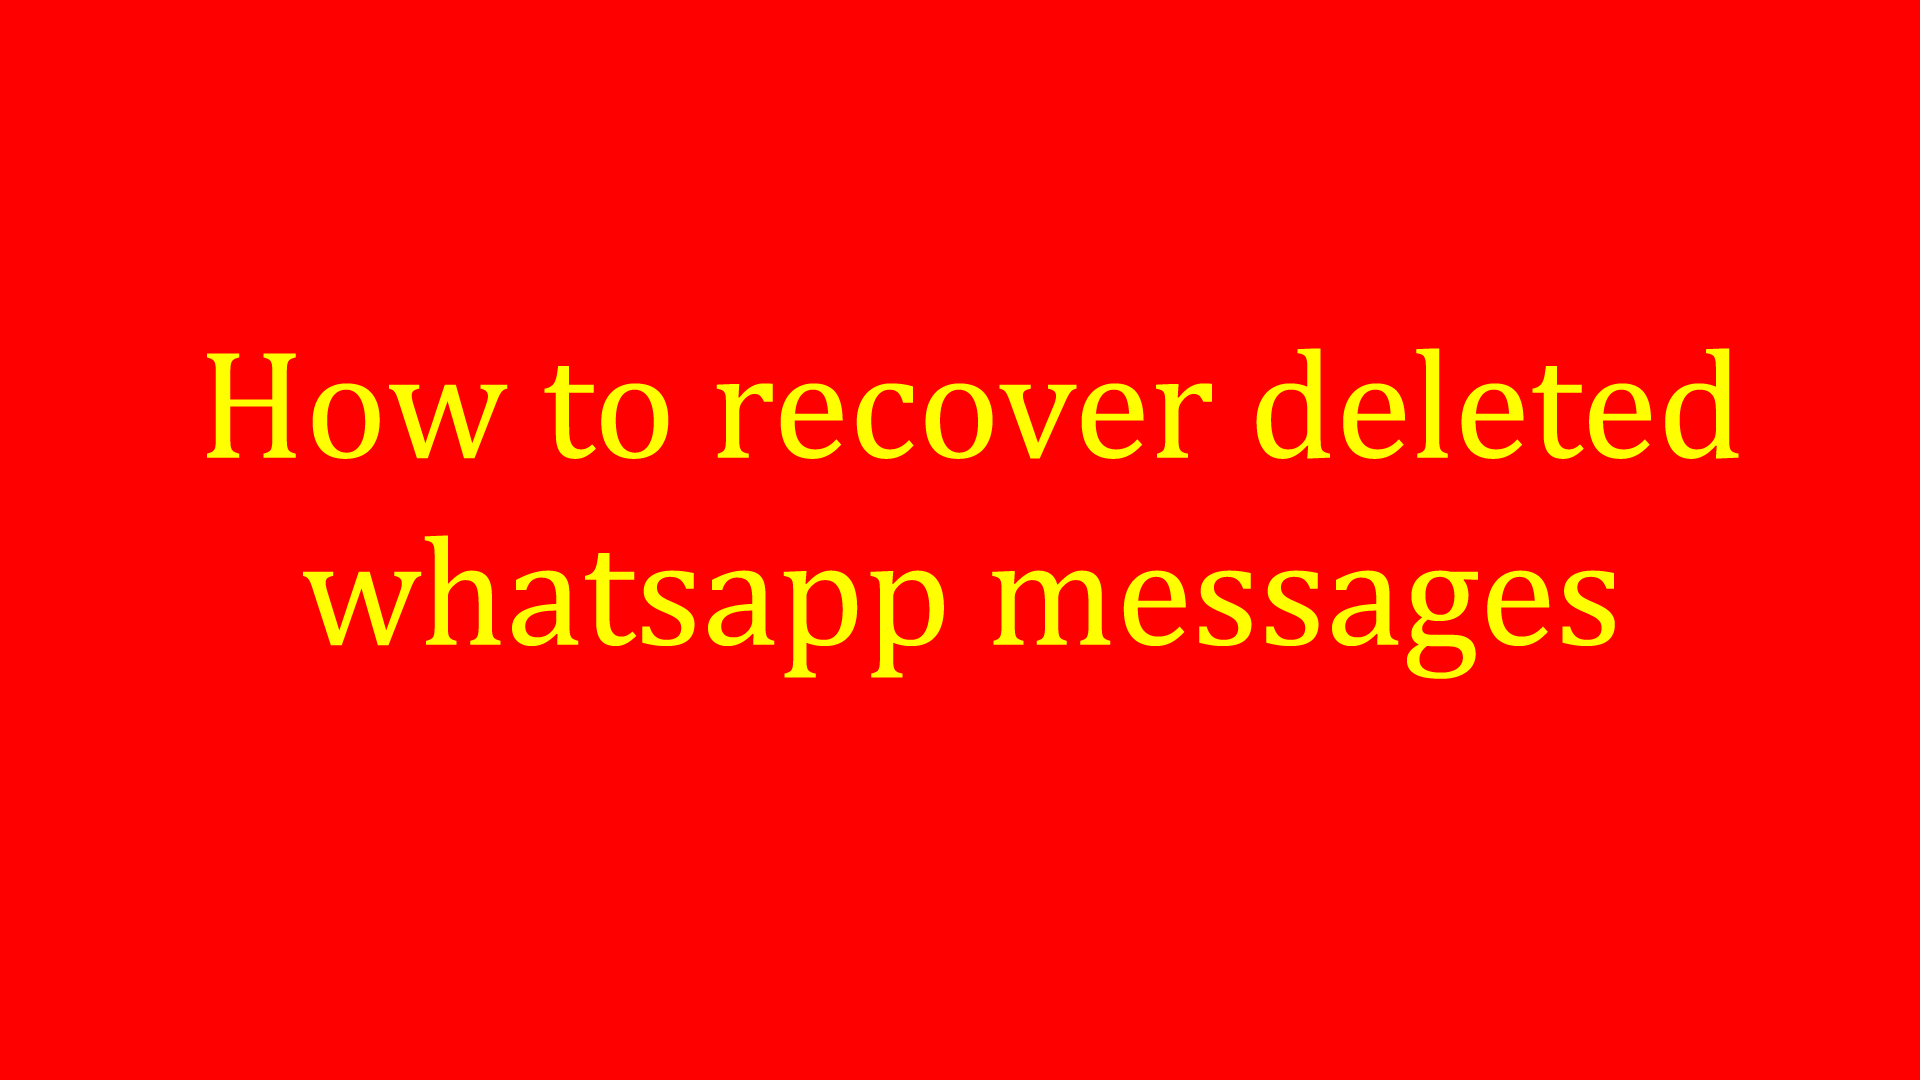 Recover deleted whatsapp messages without backup